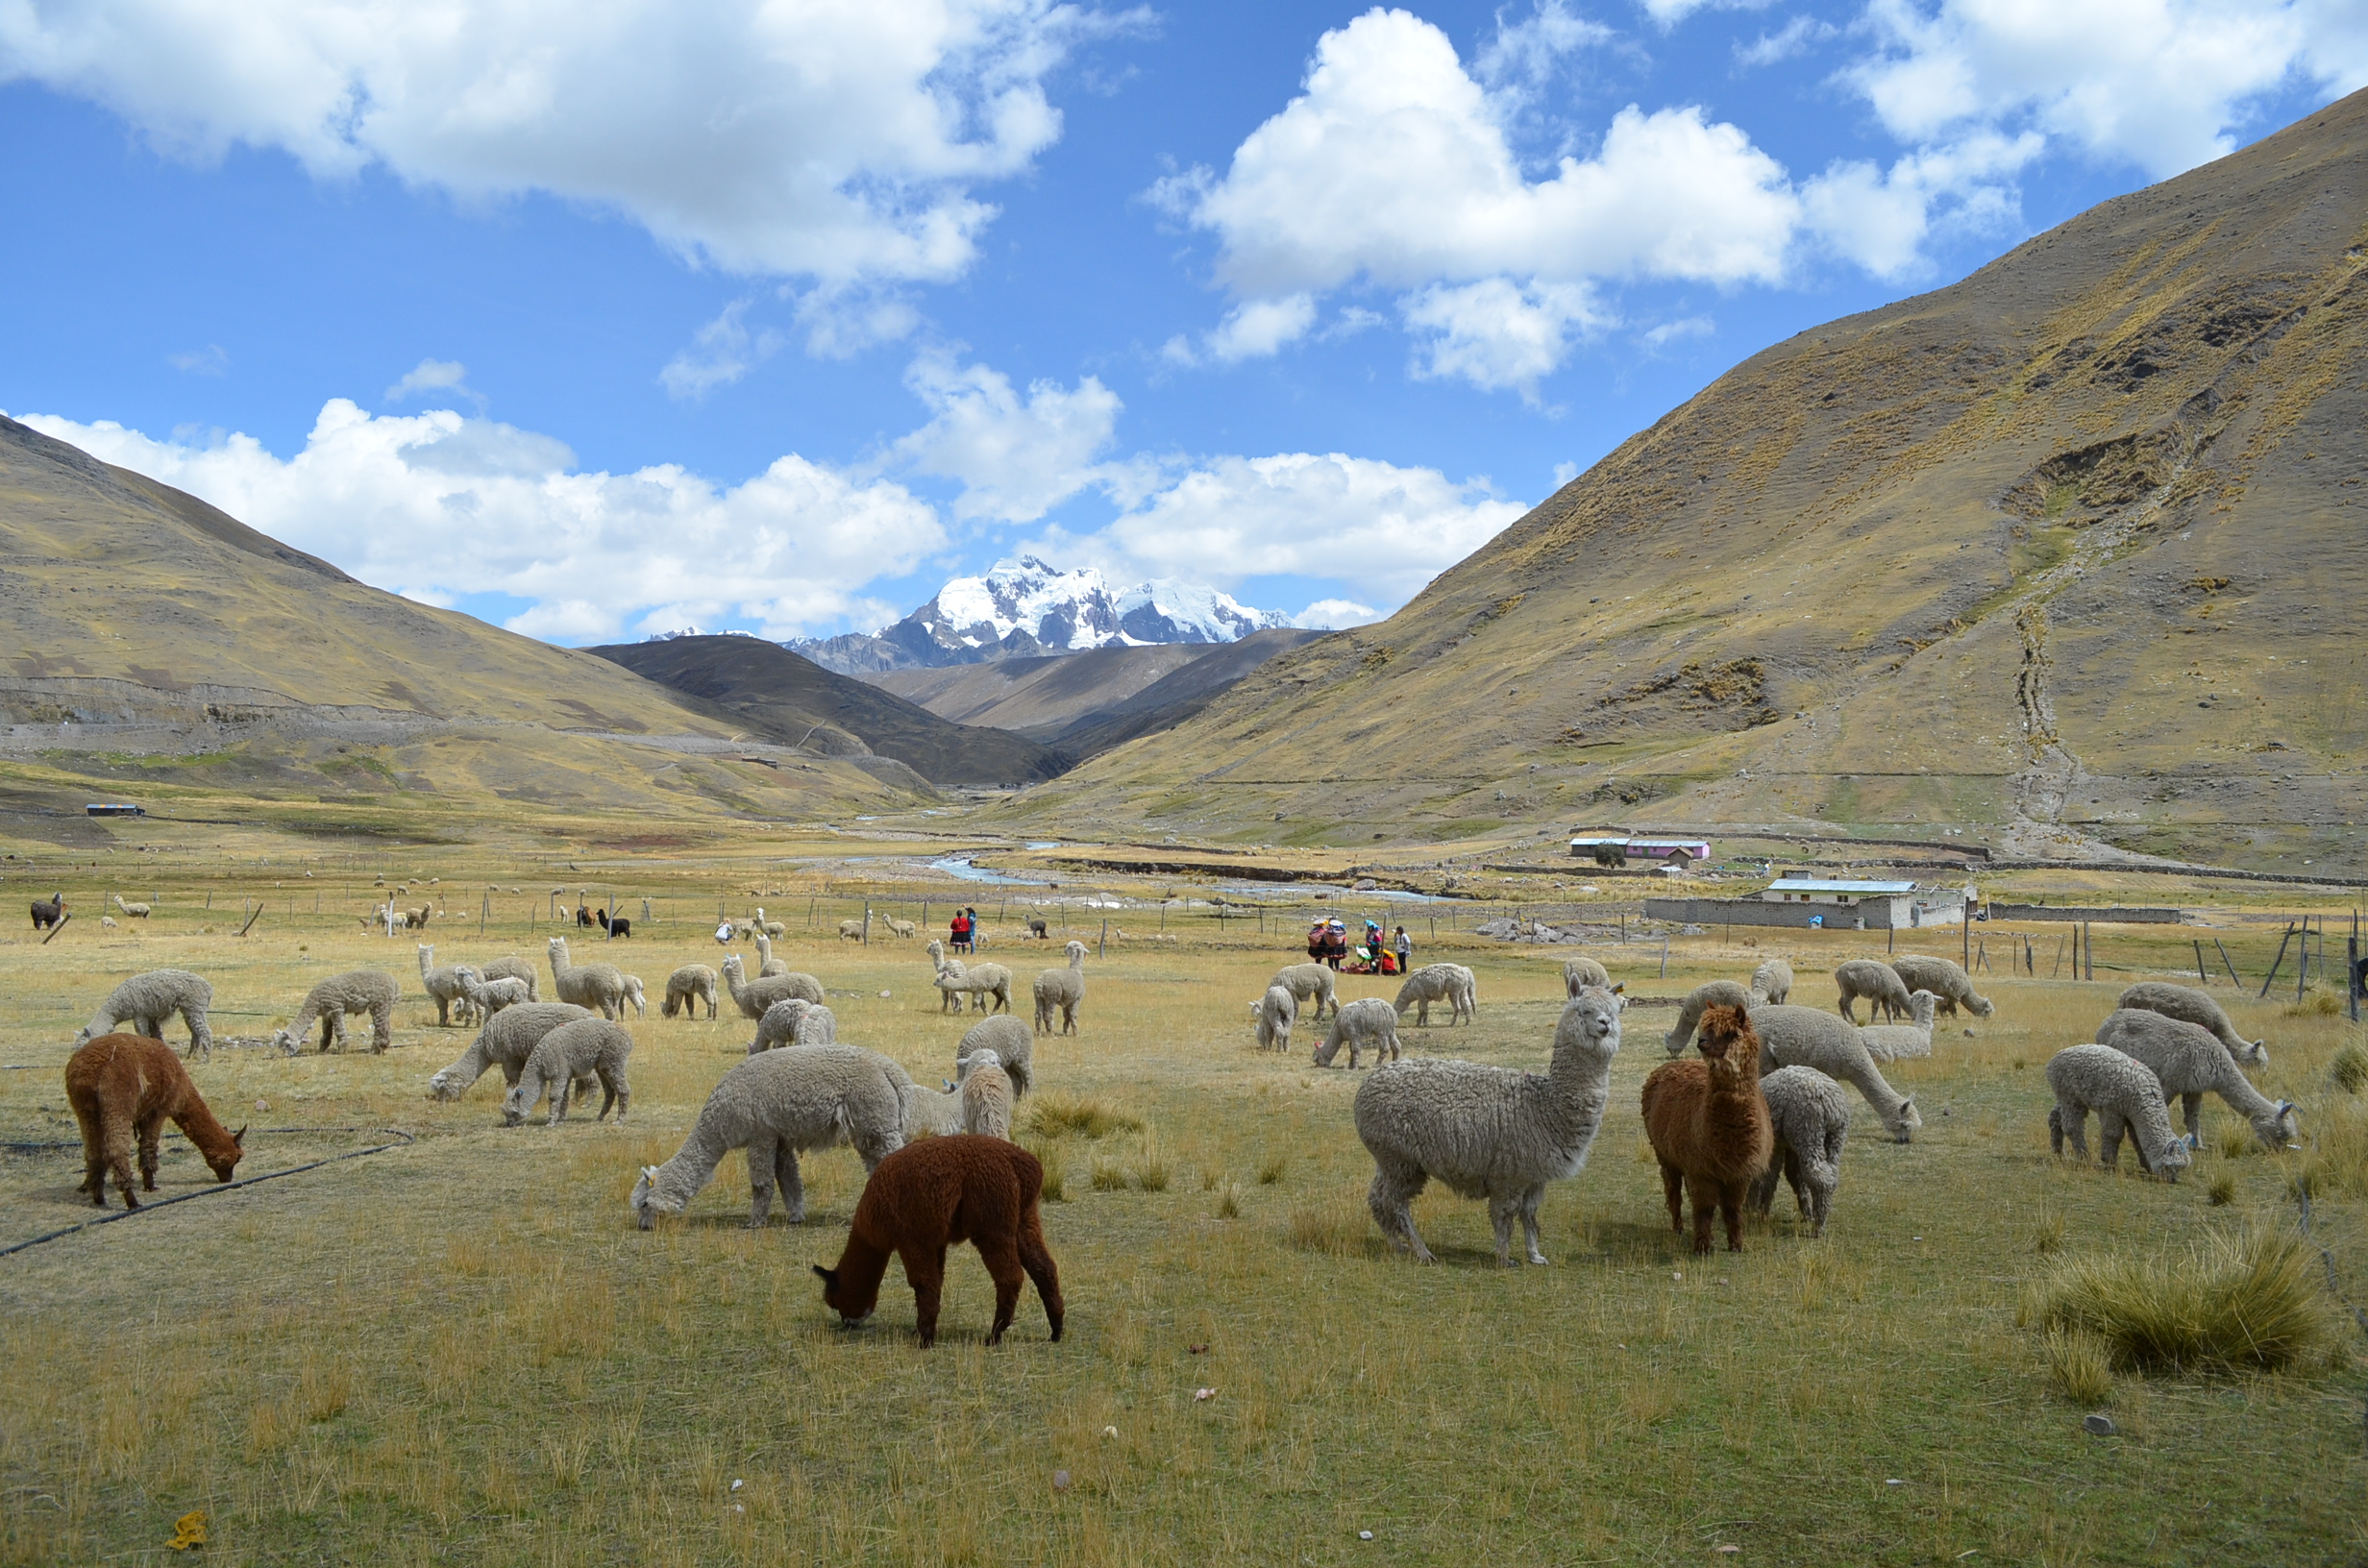 In the Peruvian Andes, alpacas have been domesticated for thousands of years.